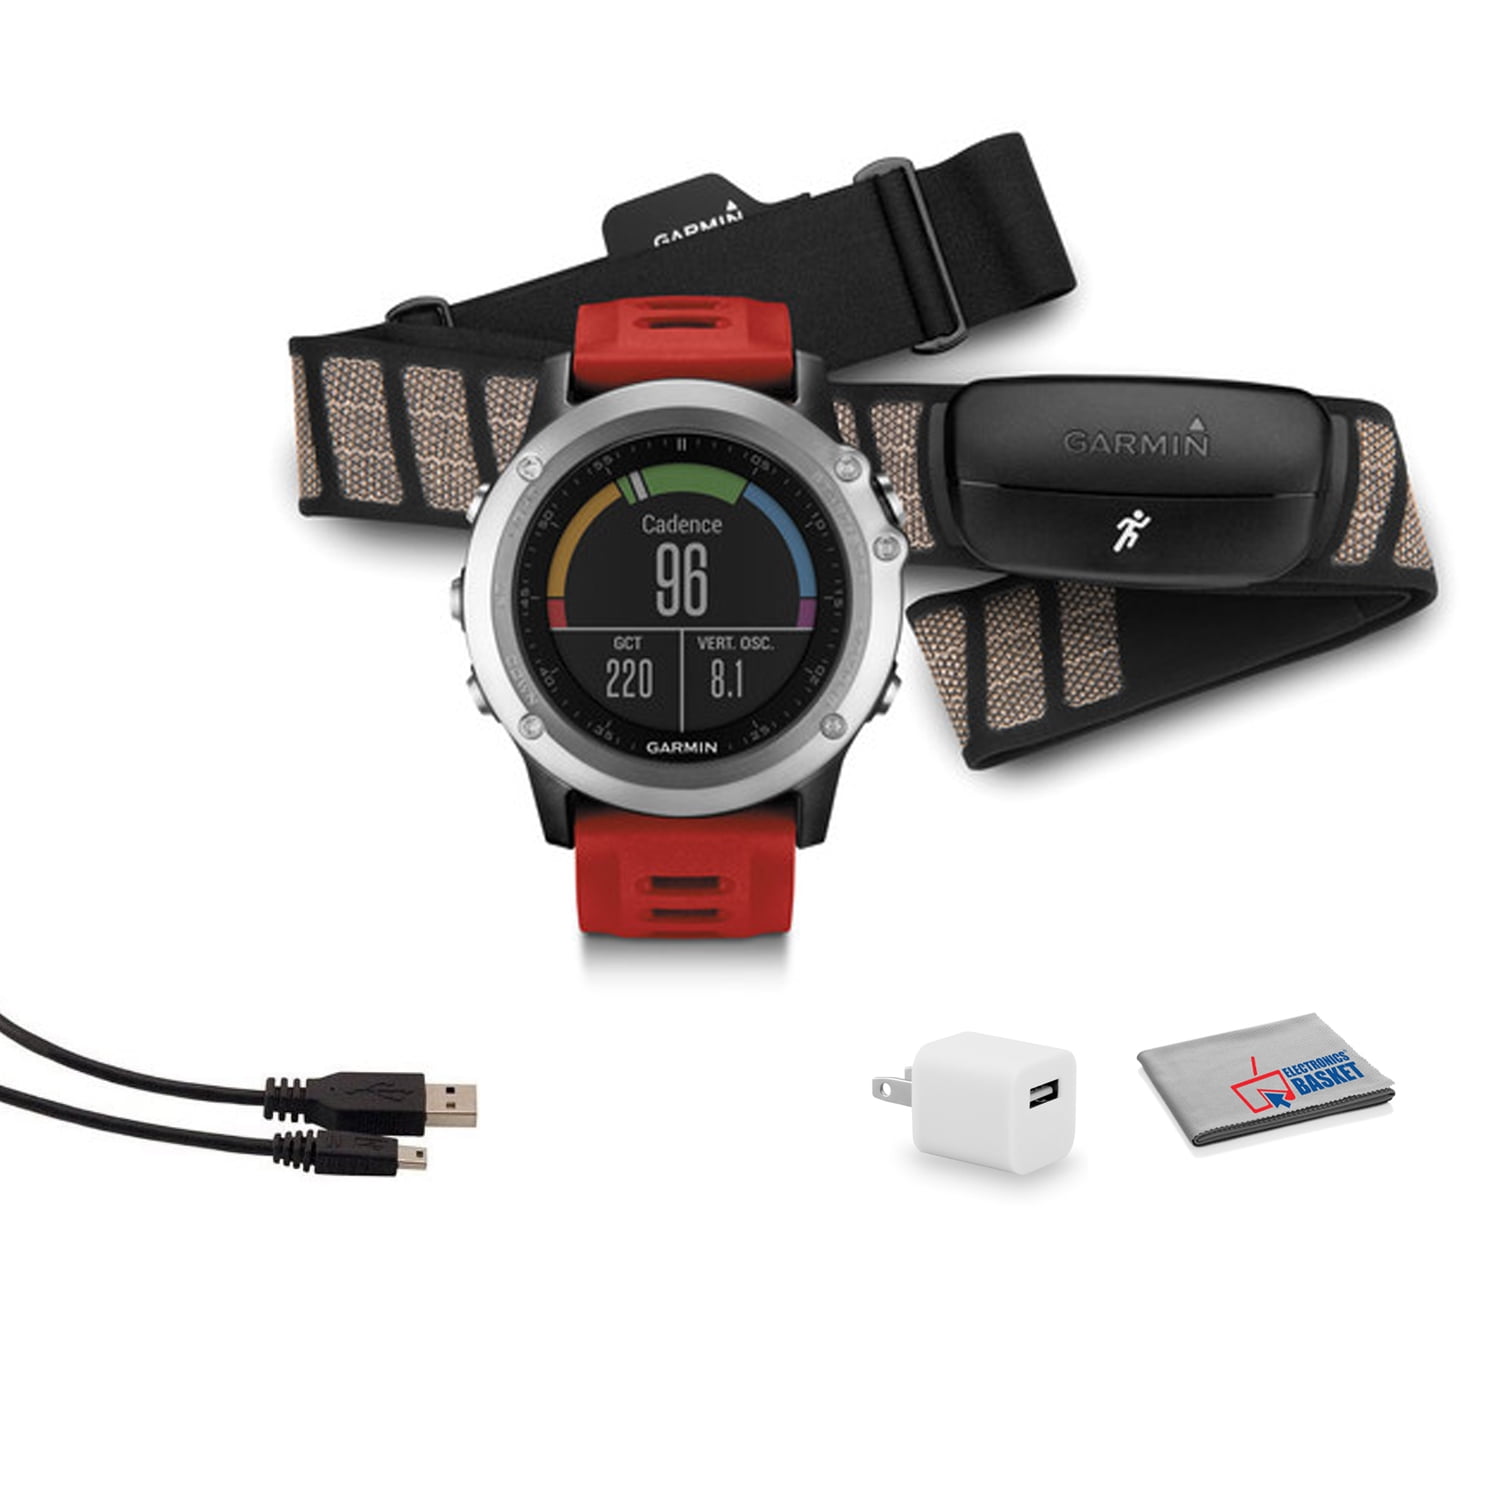 Garmin fenix 3 Multisport Training GPS Fitness Watch with HRM-Run Heart Rate Monitor with Red Band) Bundle USB Adapter - Walmart.com